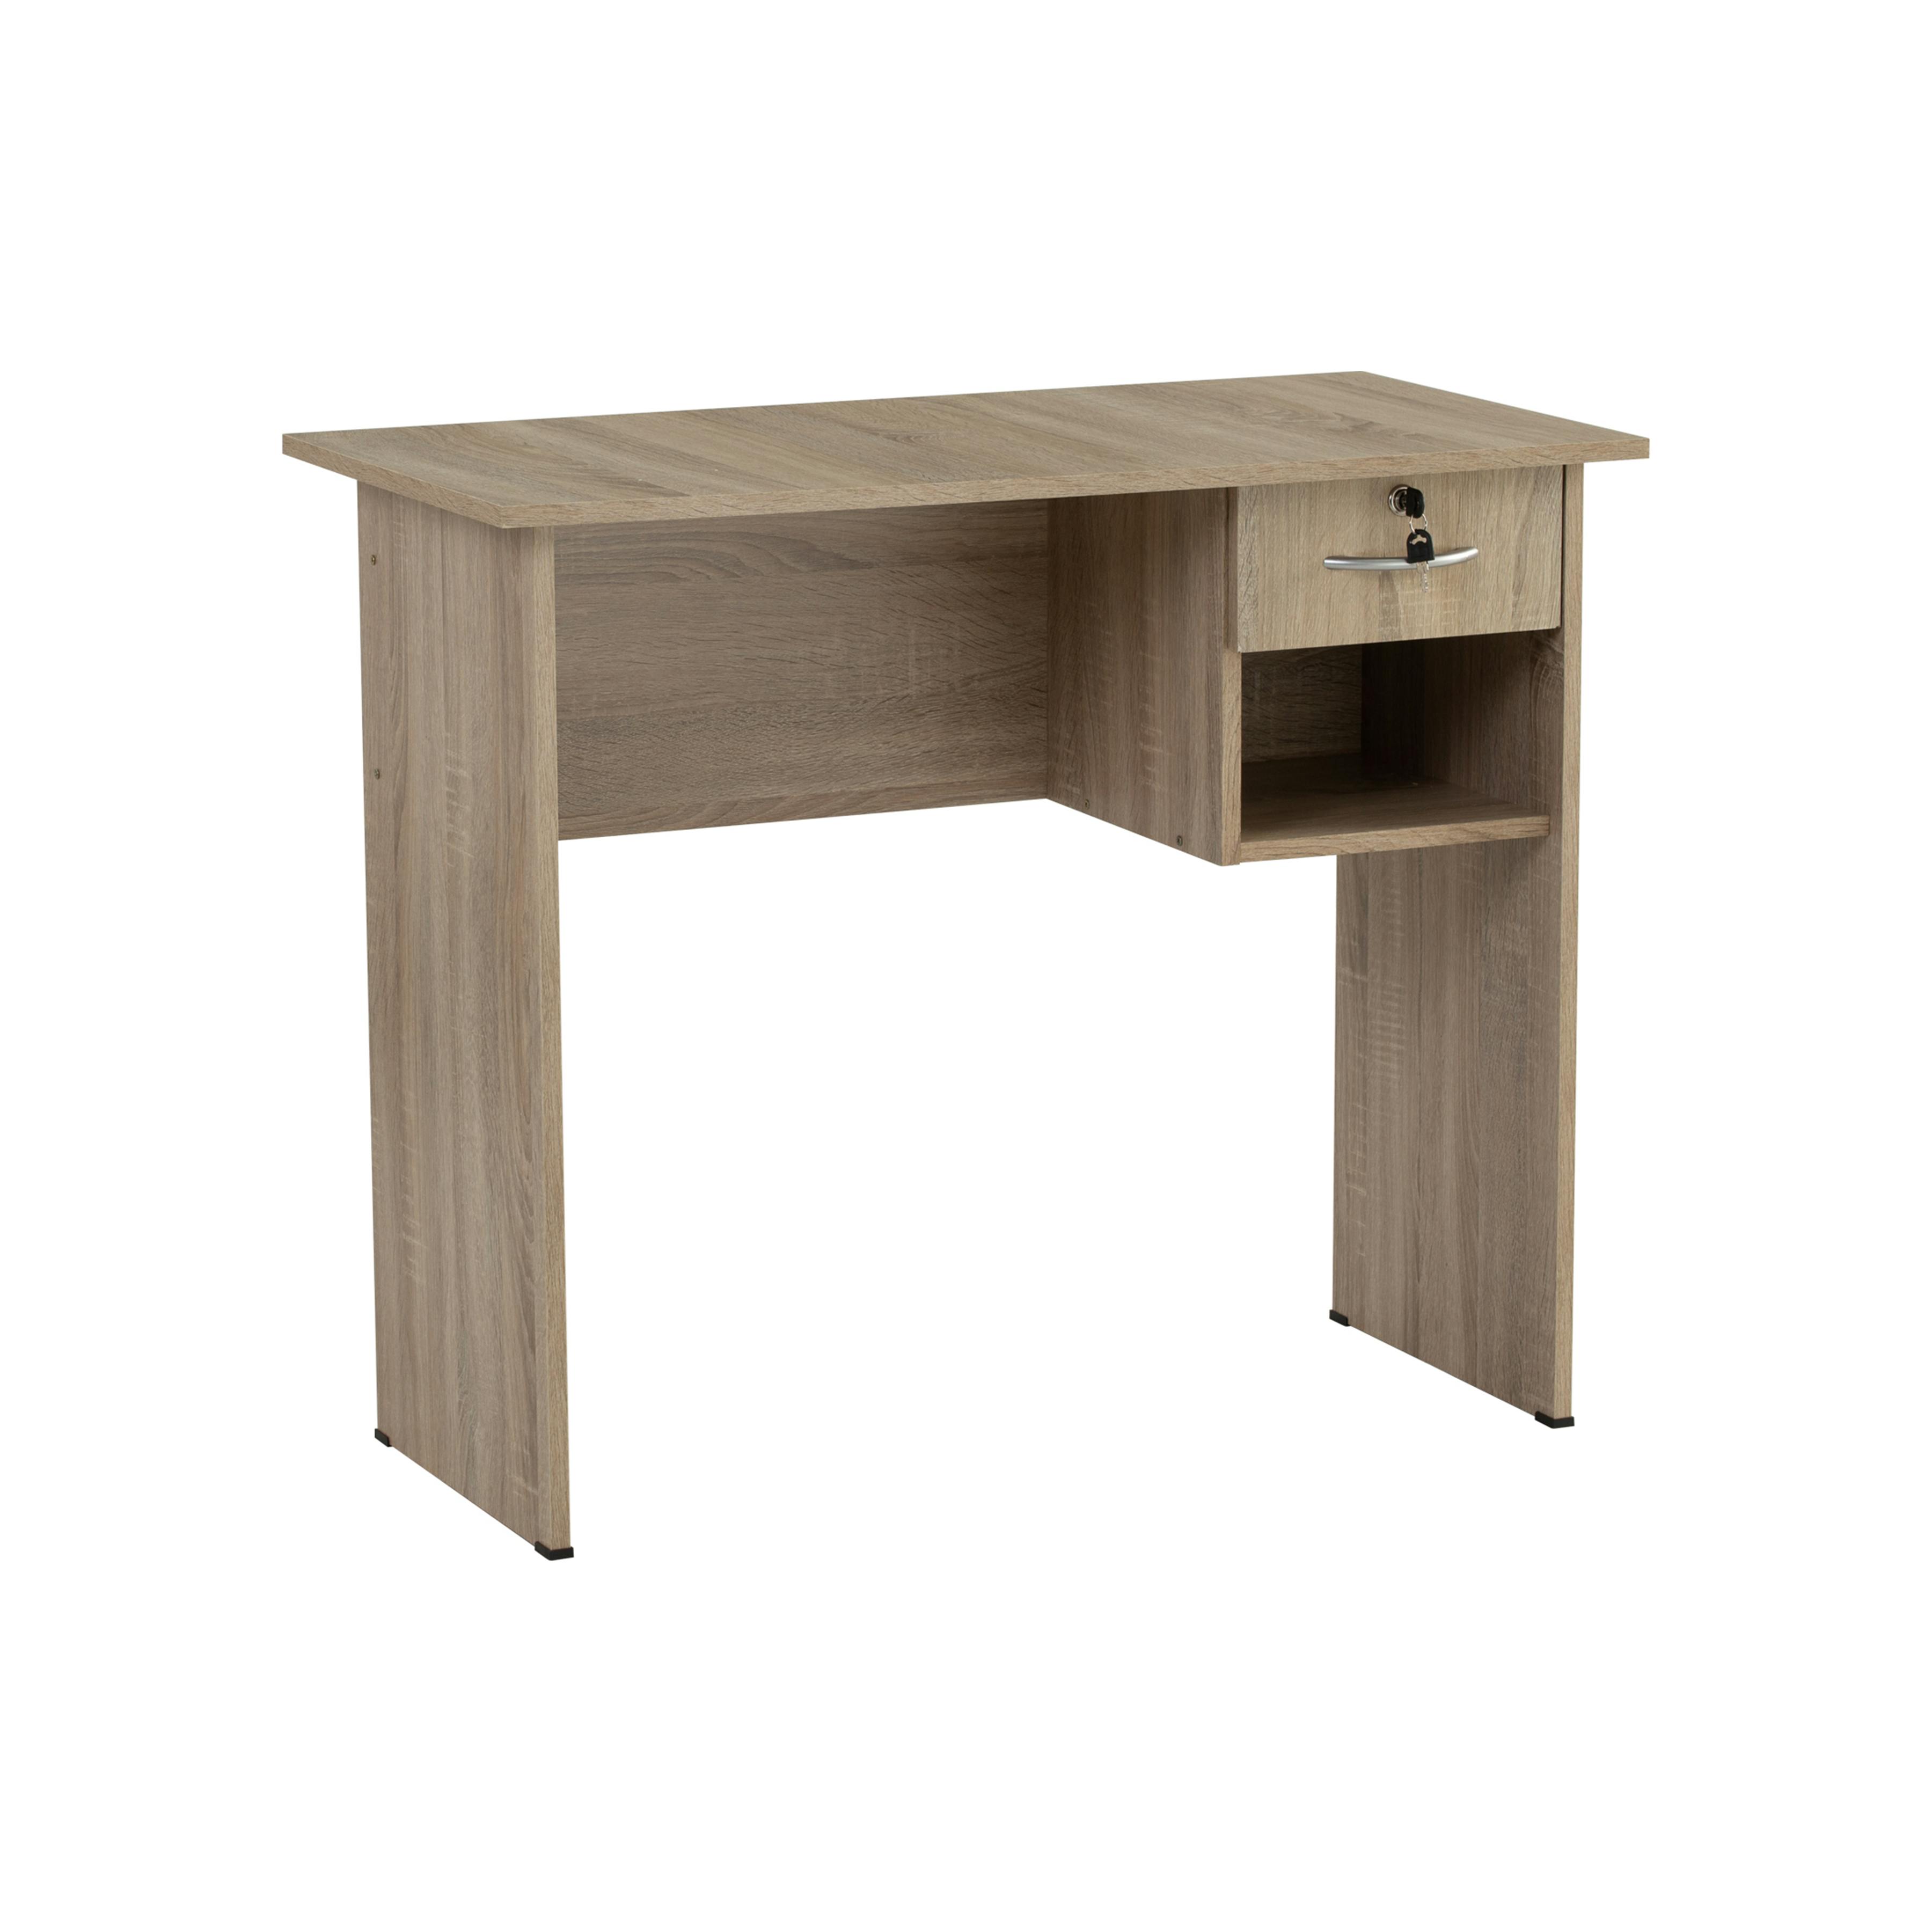 1.7 Metre Ultra Modern Office Table (without Drawer)